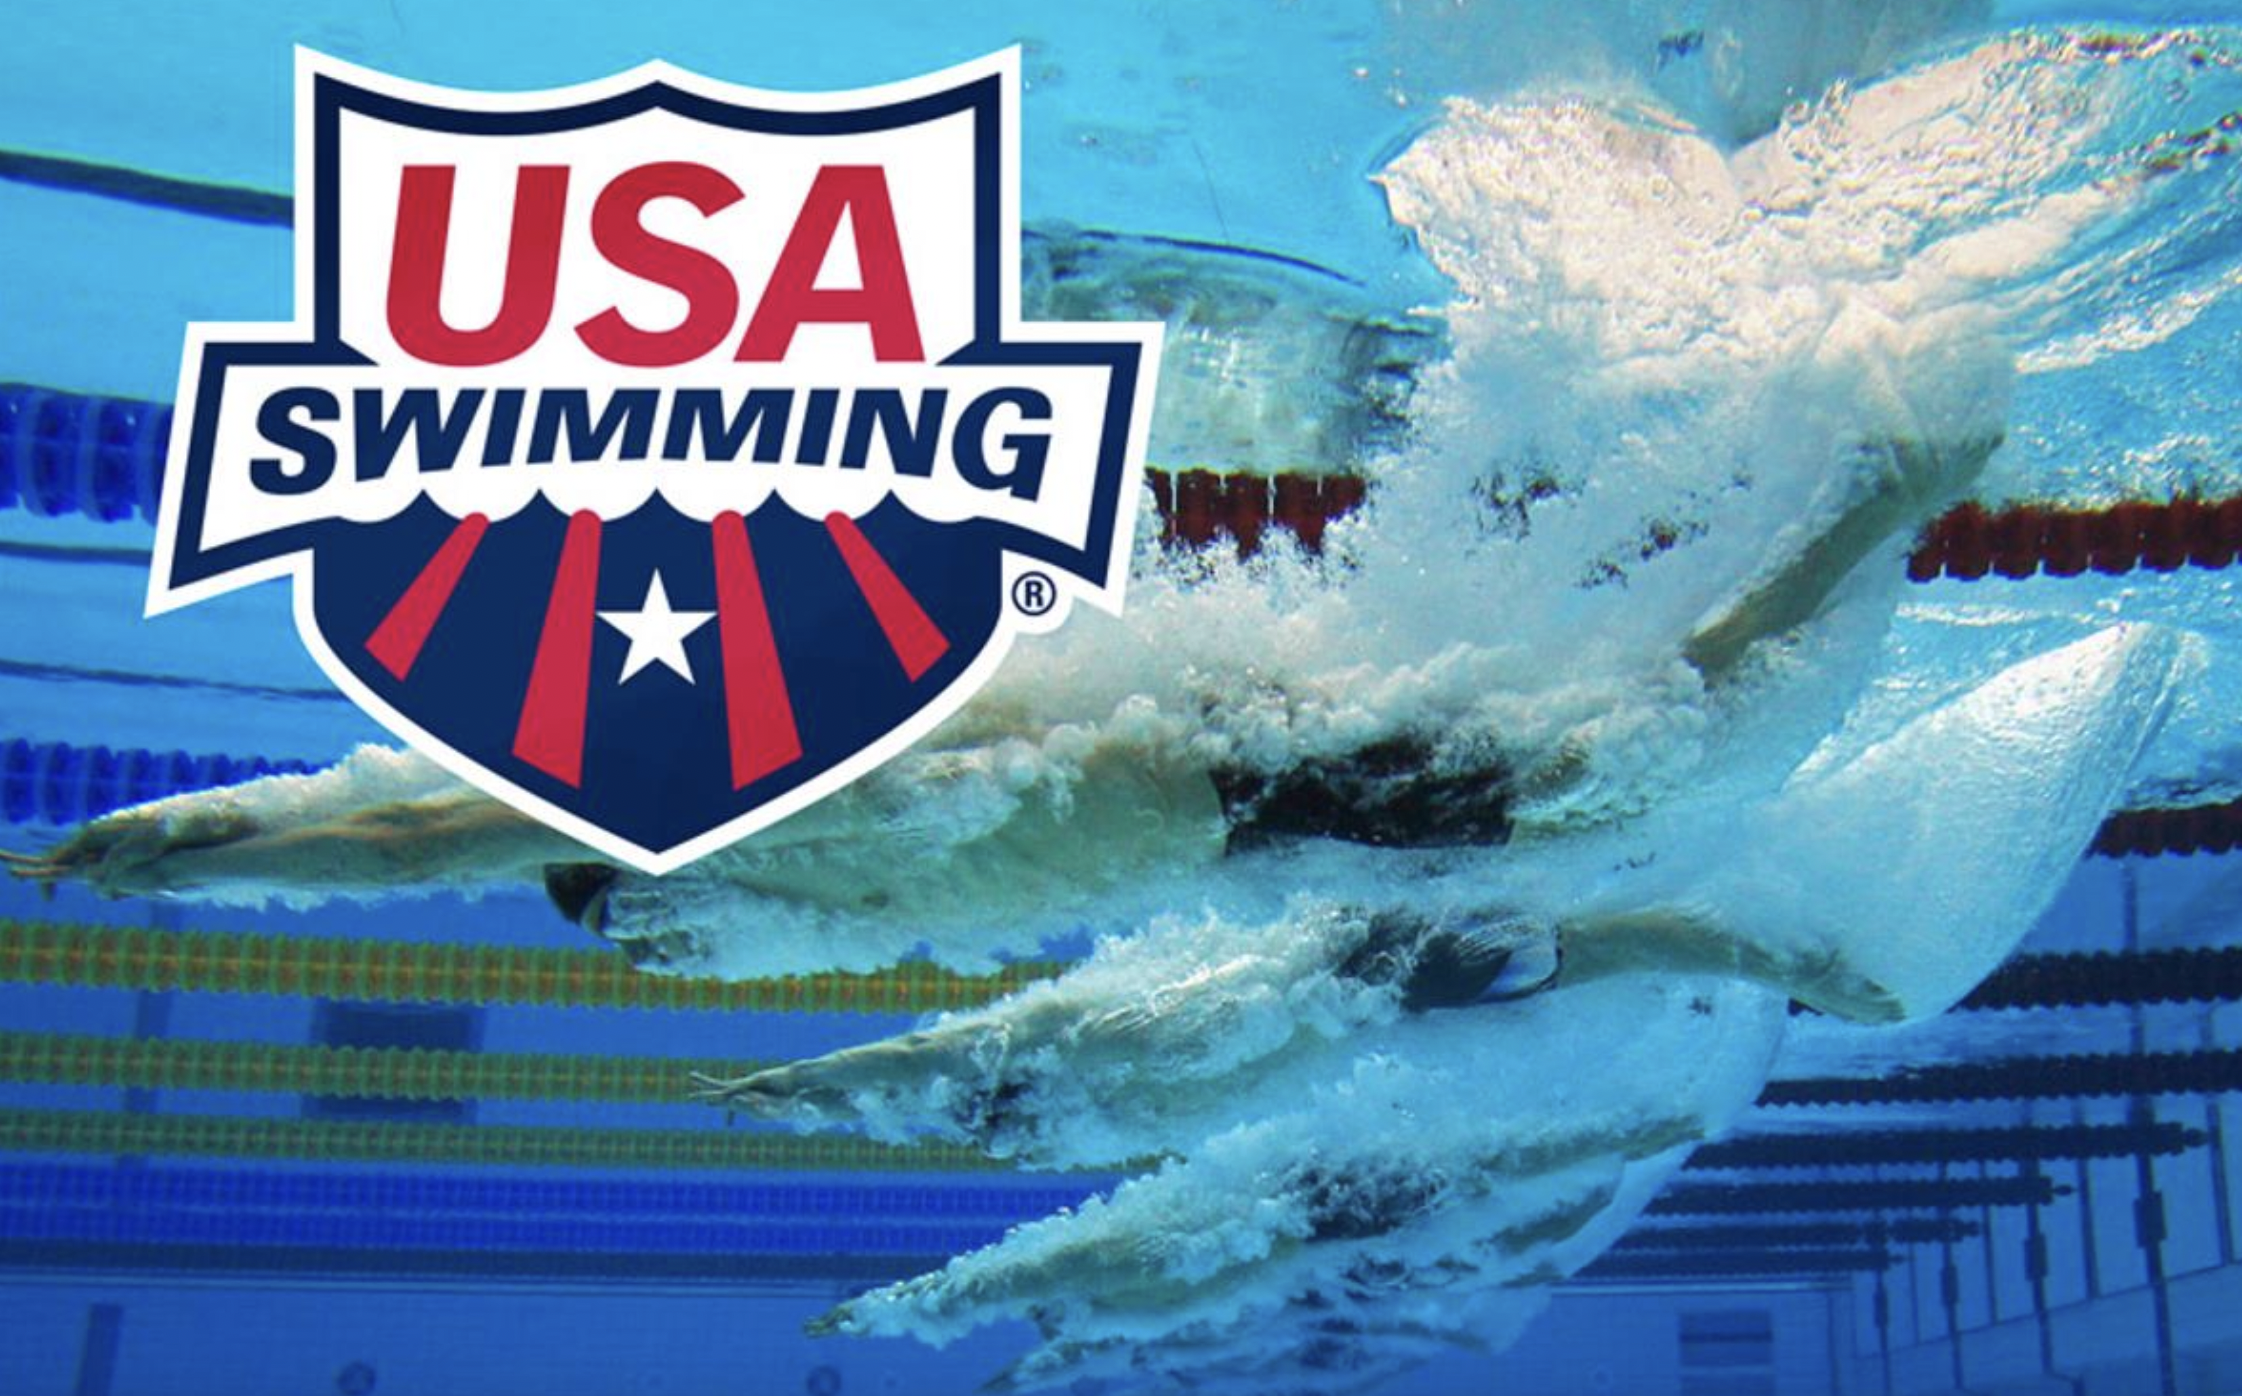 “This takes a lot of courage to come forward.” U.S. collegiate swimming coach placed on leave following allegations of bullying and verbal abuse